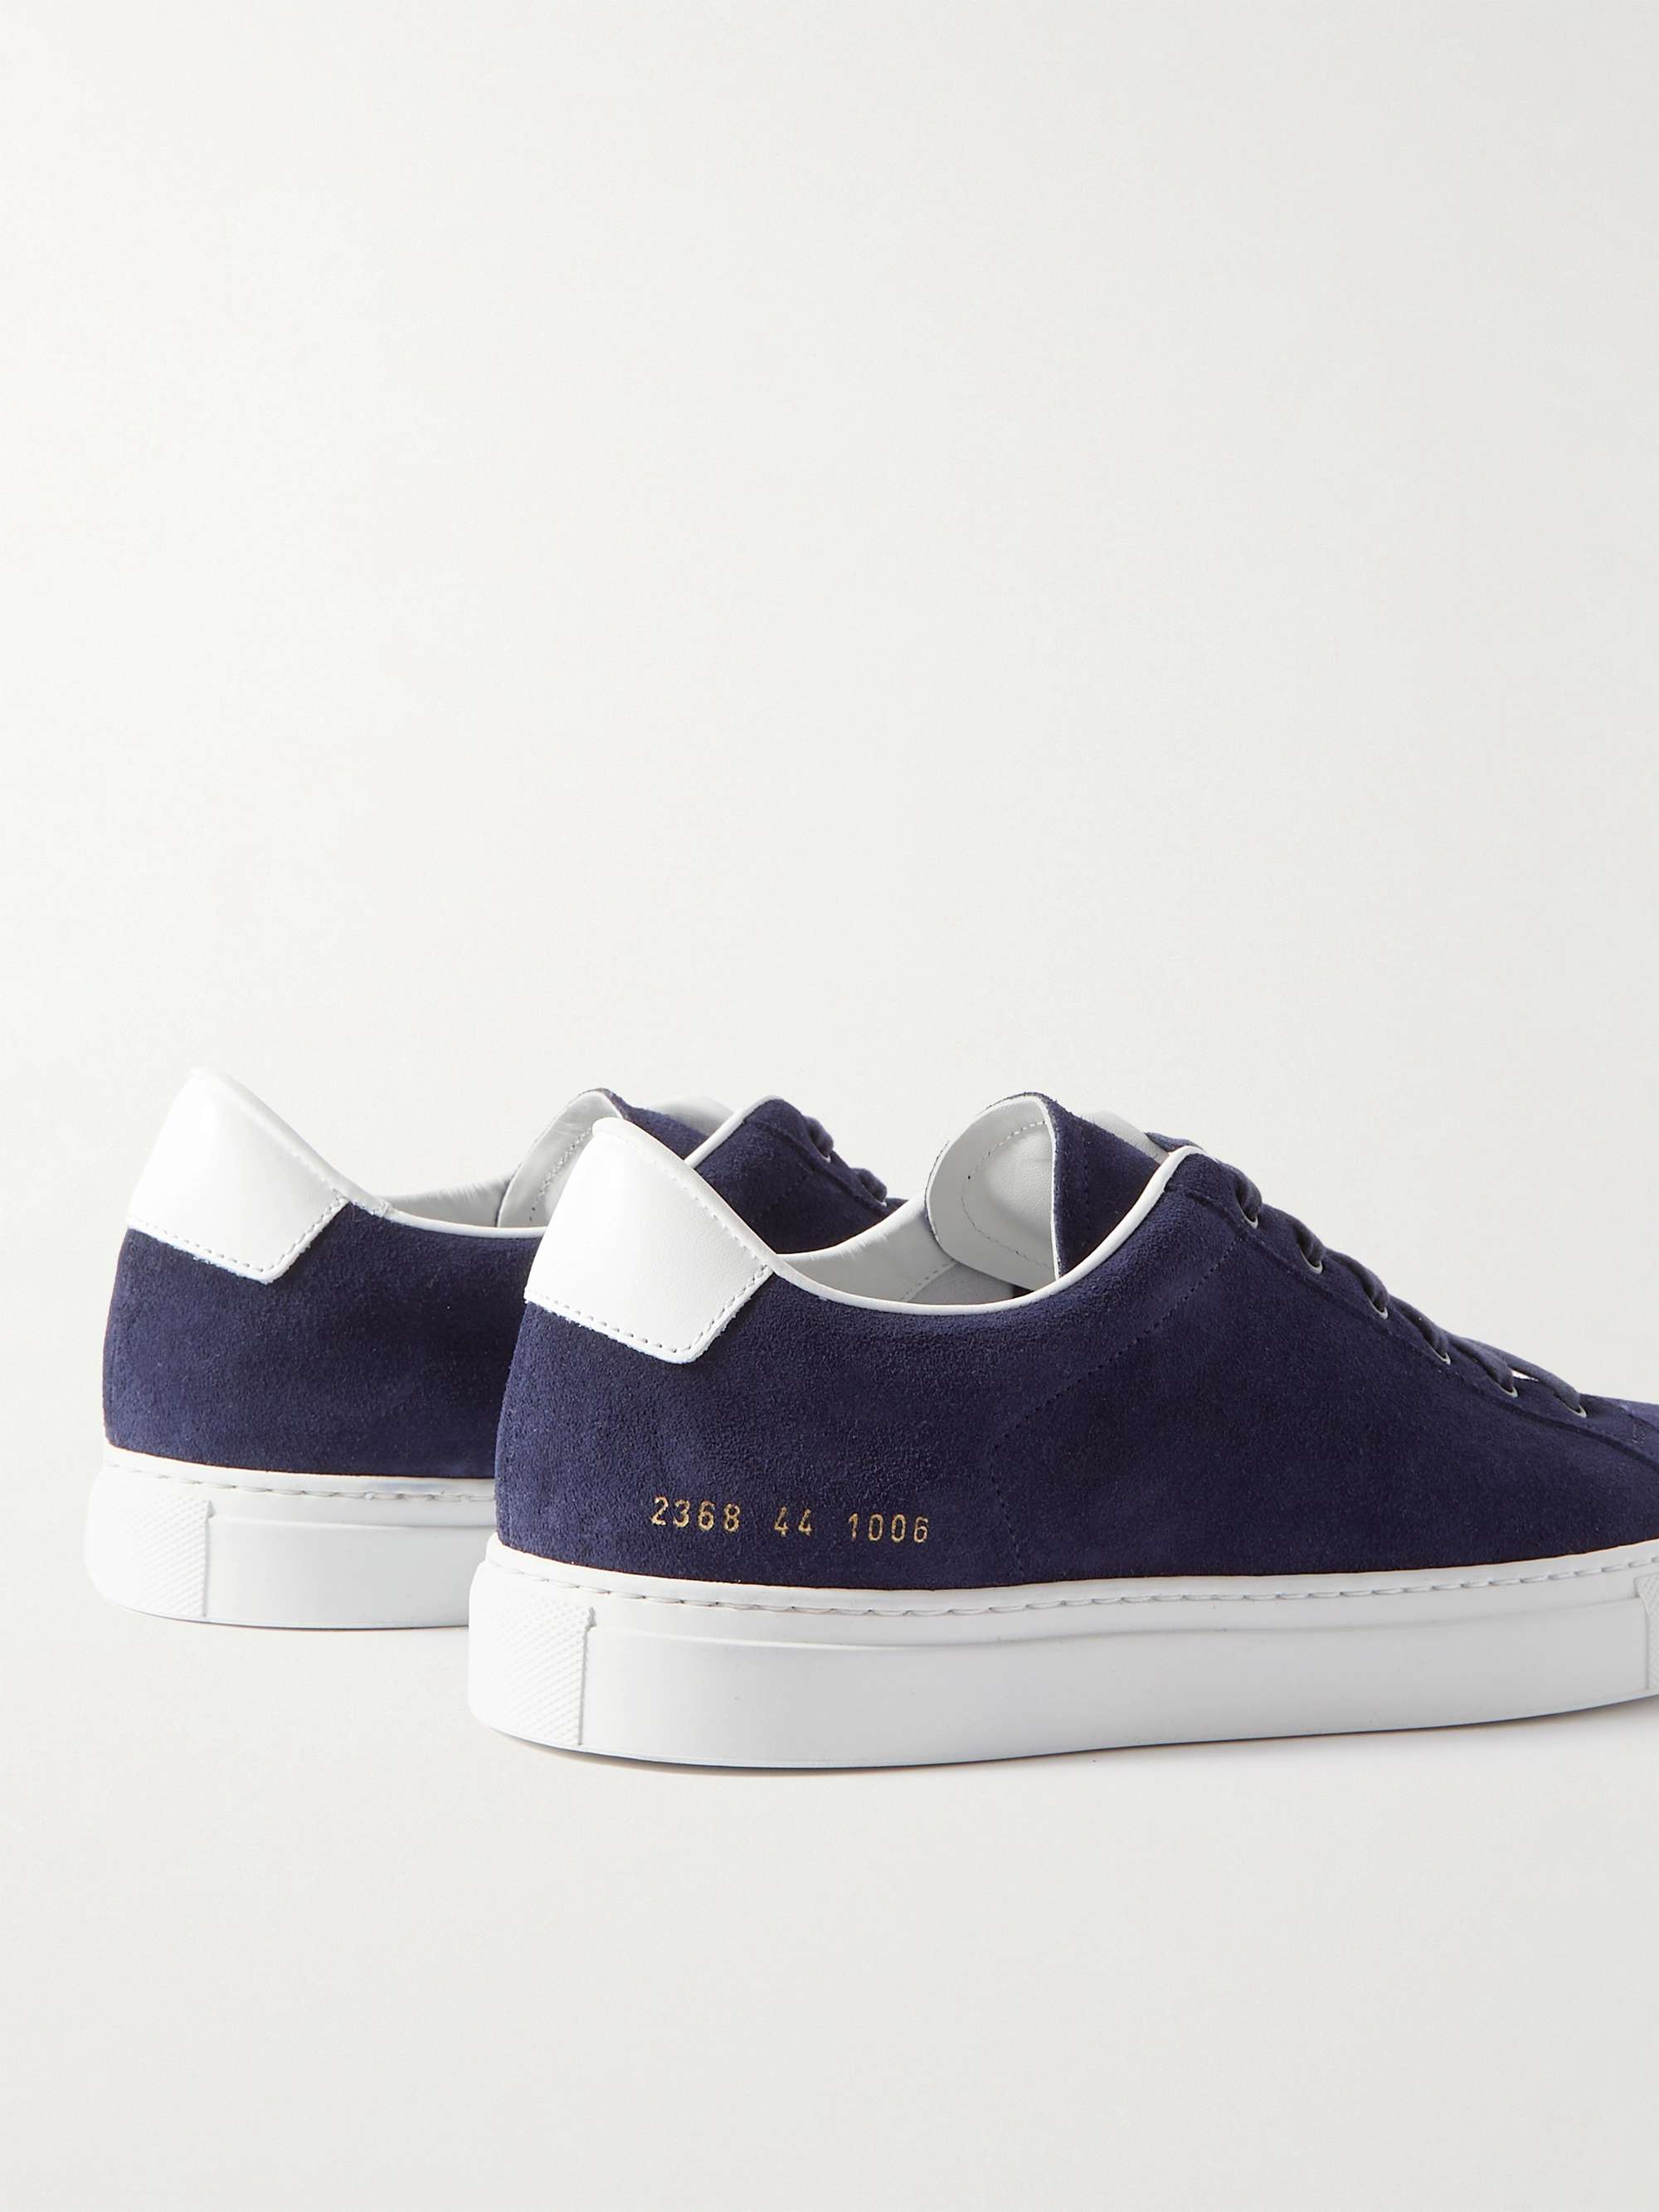 COMMON PROJECTS Retro Low Leather-Trimmed Suede Sneakers